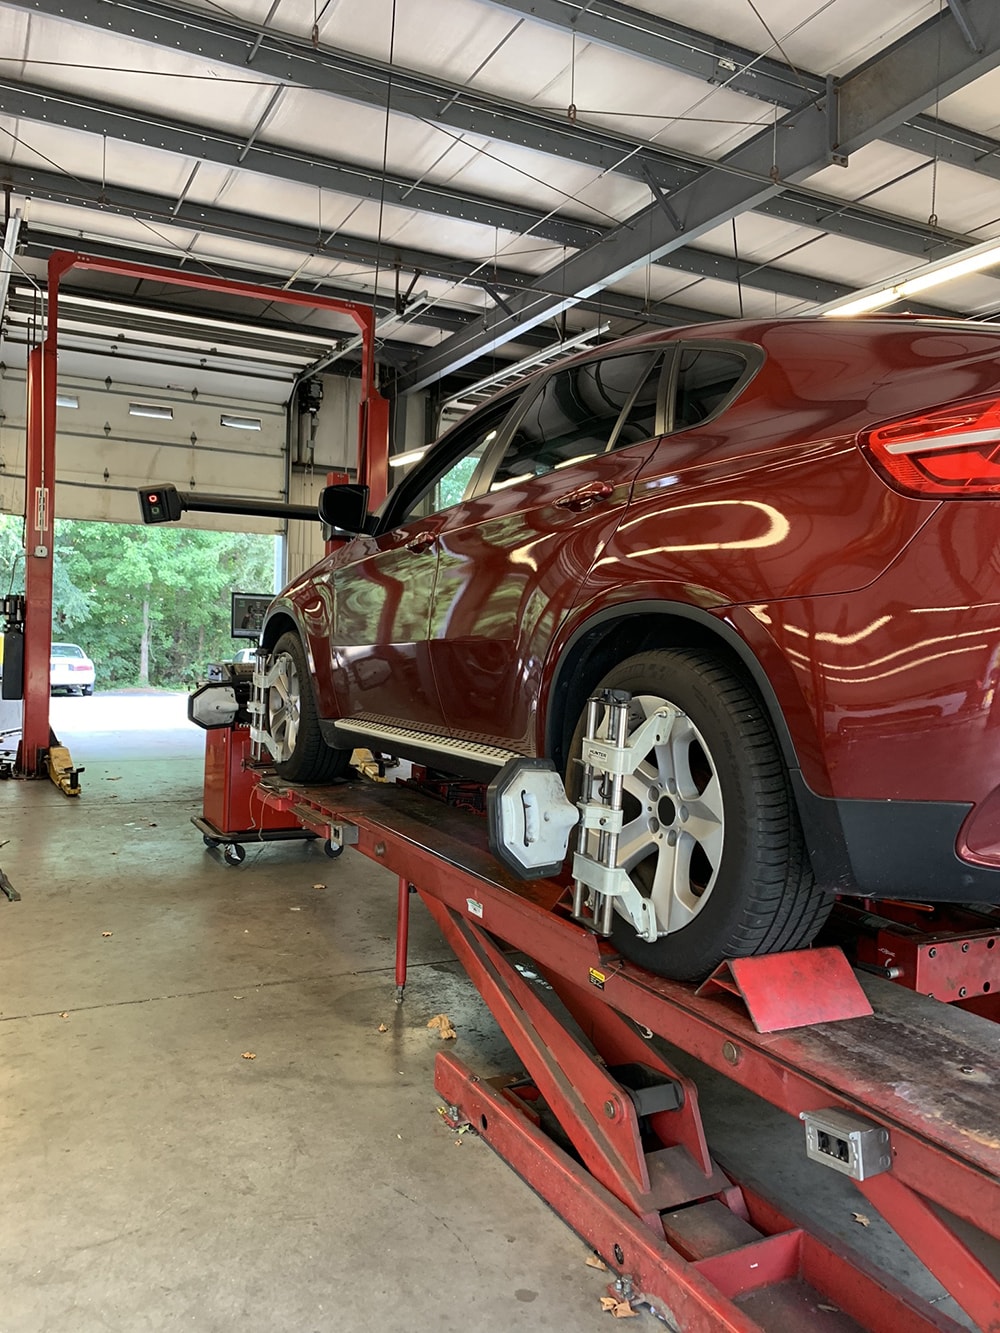 The importance of maintaining proper wheel alignment